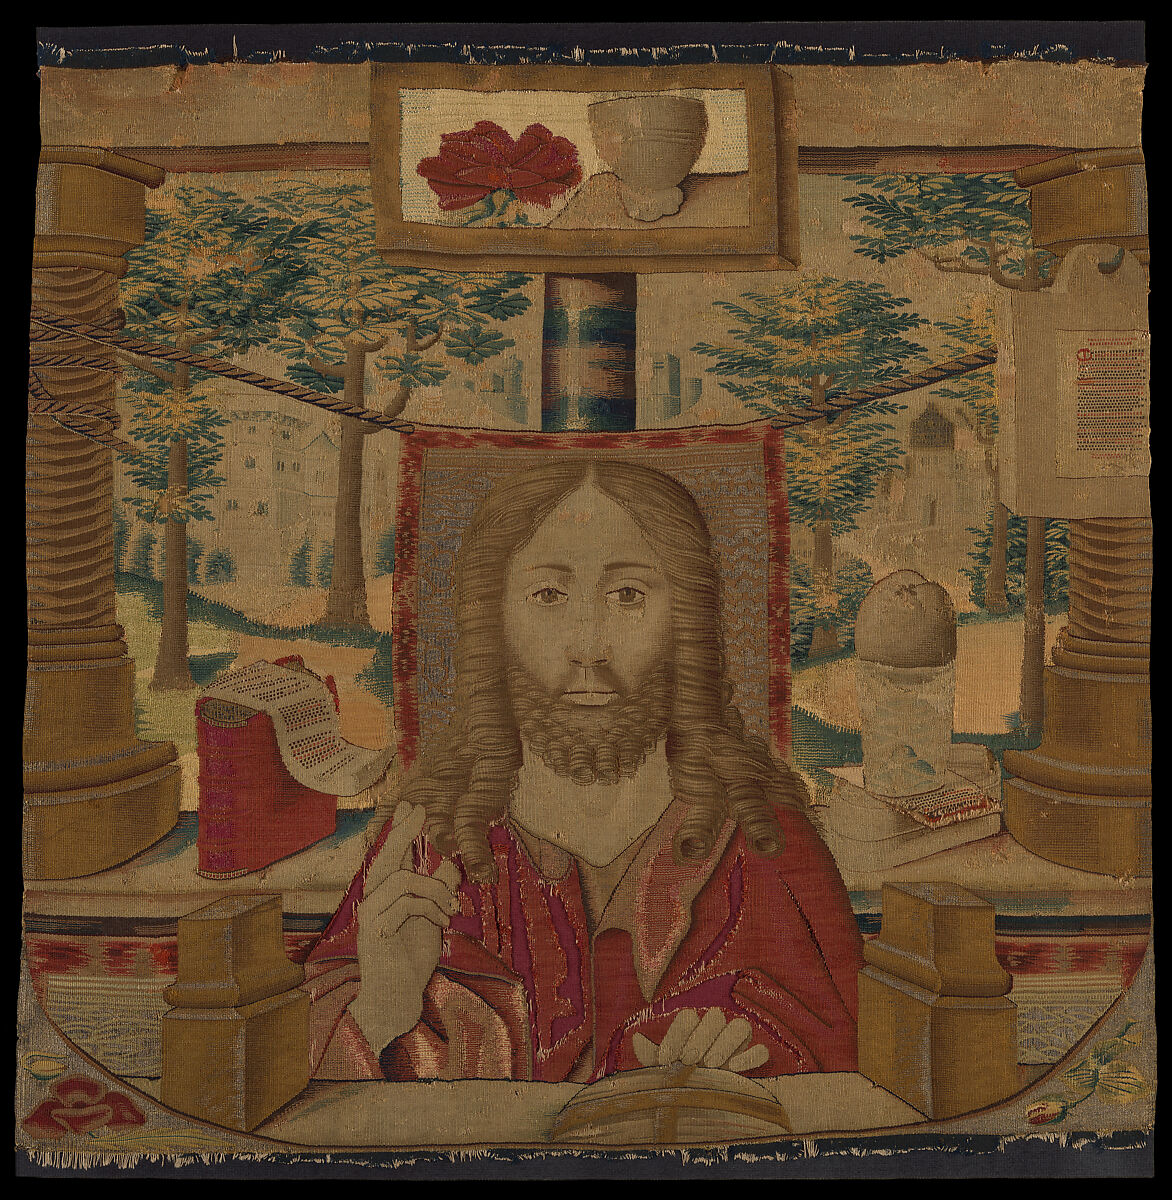 Christ of the Mystic Wine Press, Tapestry weave, wool, silk and metallic threads, South Netherlandish 